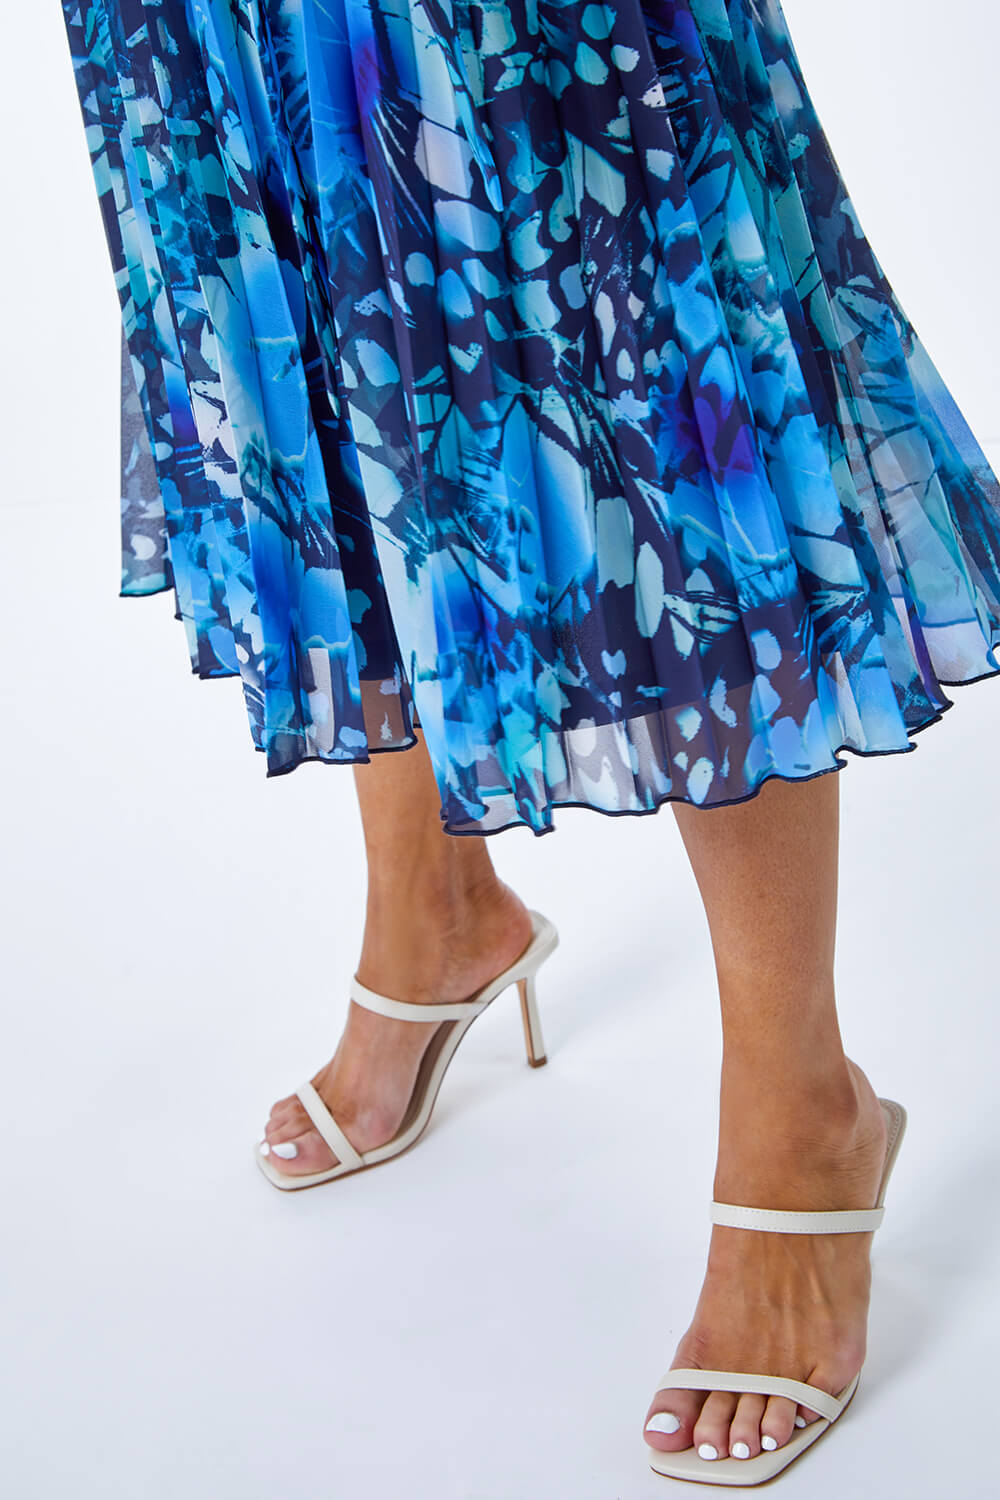 Blue Petite Abstract Print Pleated Dress, Image 5 of 5